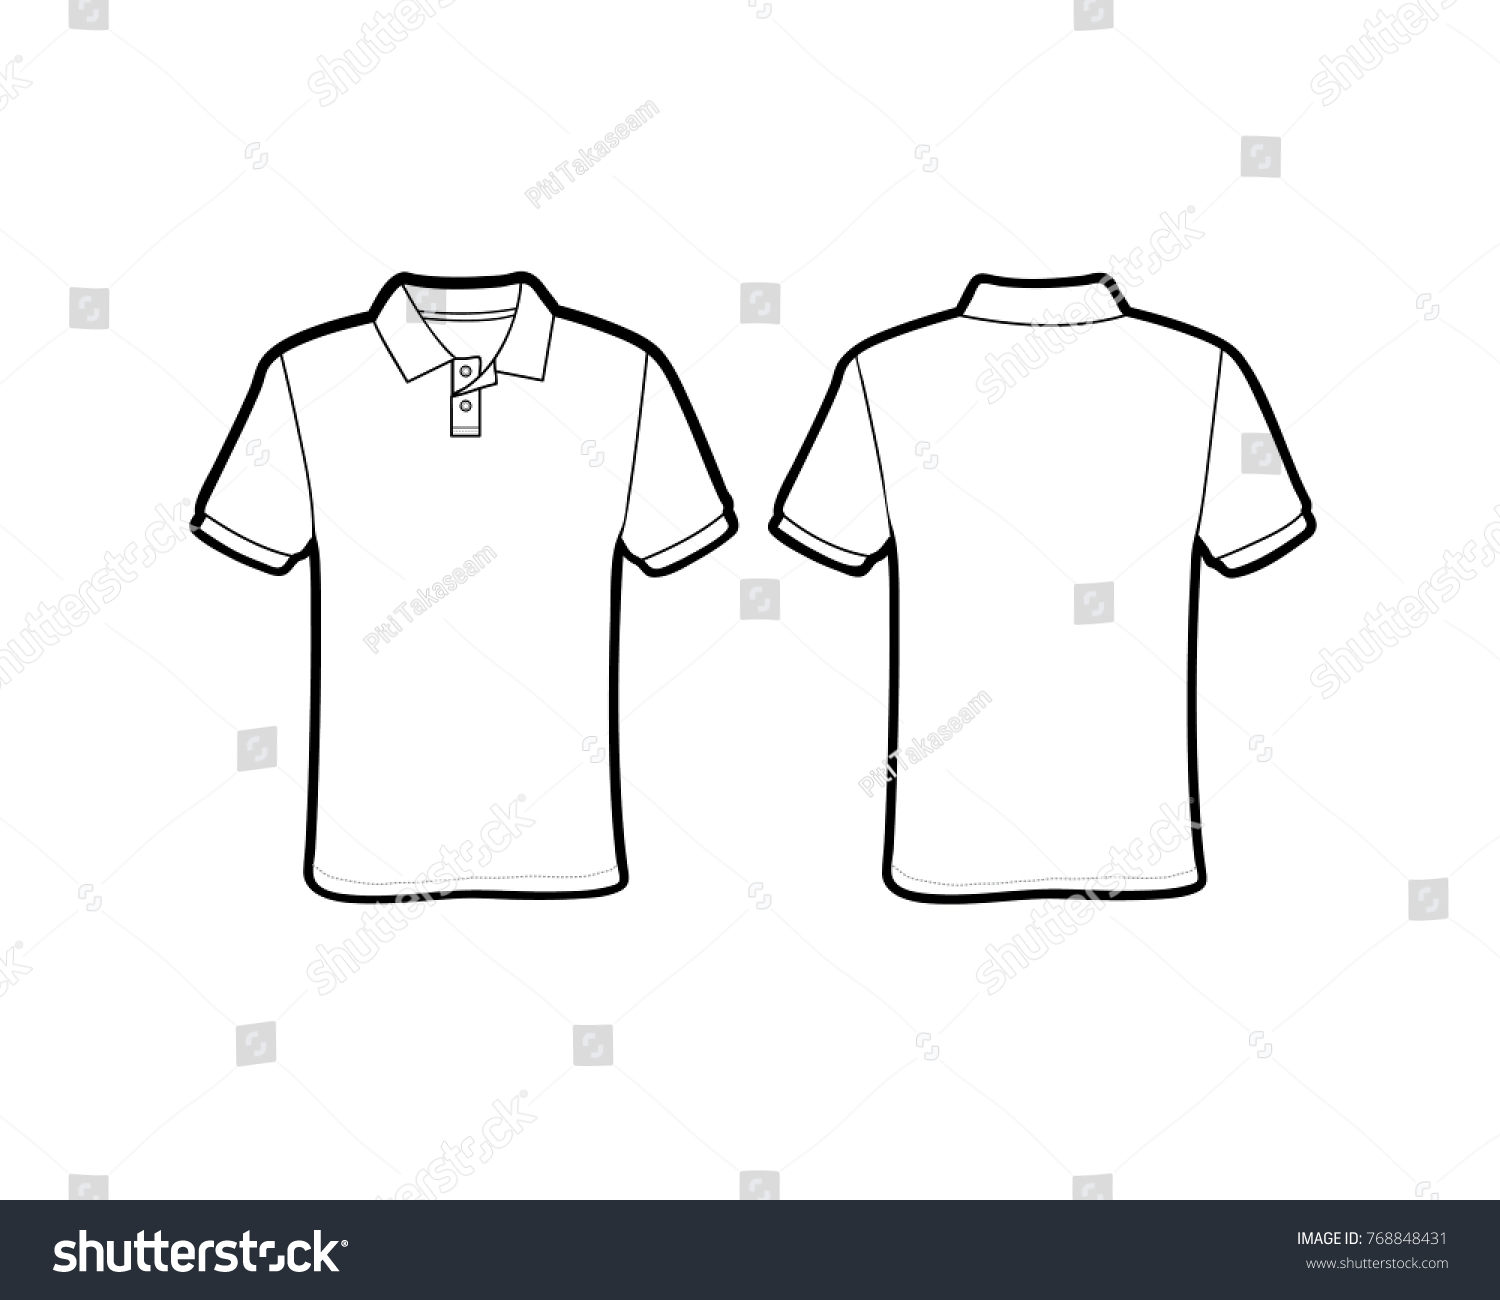 Sports Polo Shirts Vector Graphic Design Stock Vector (Royalty Free ...